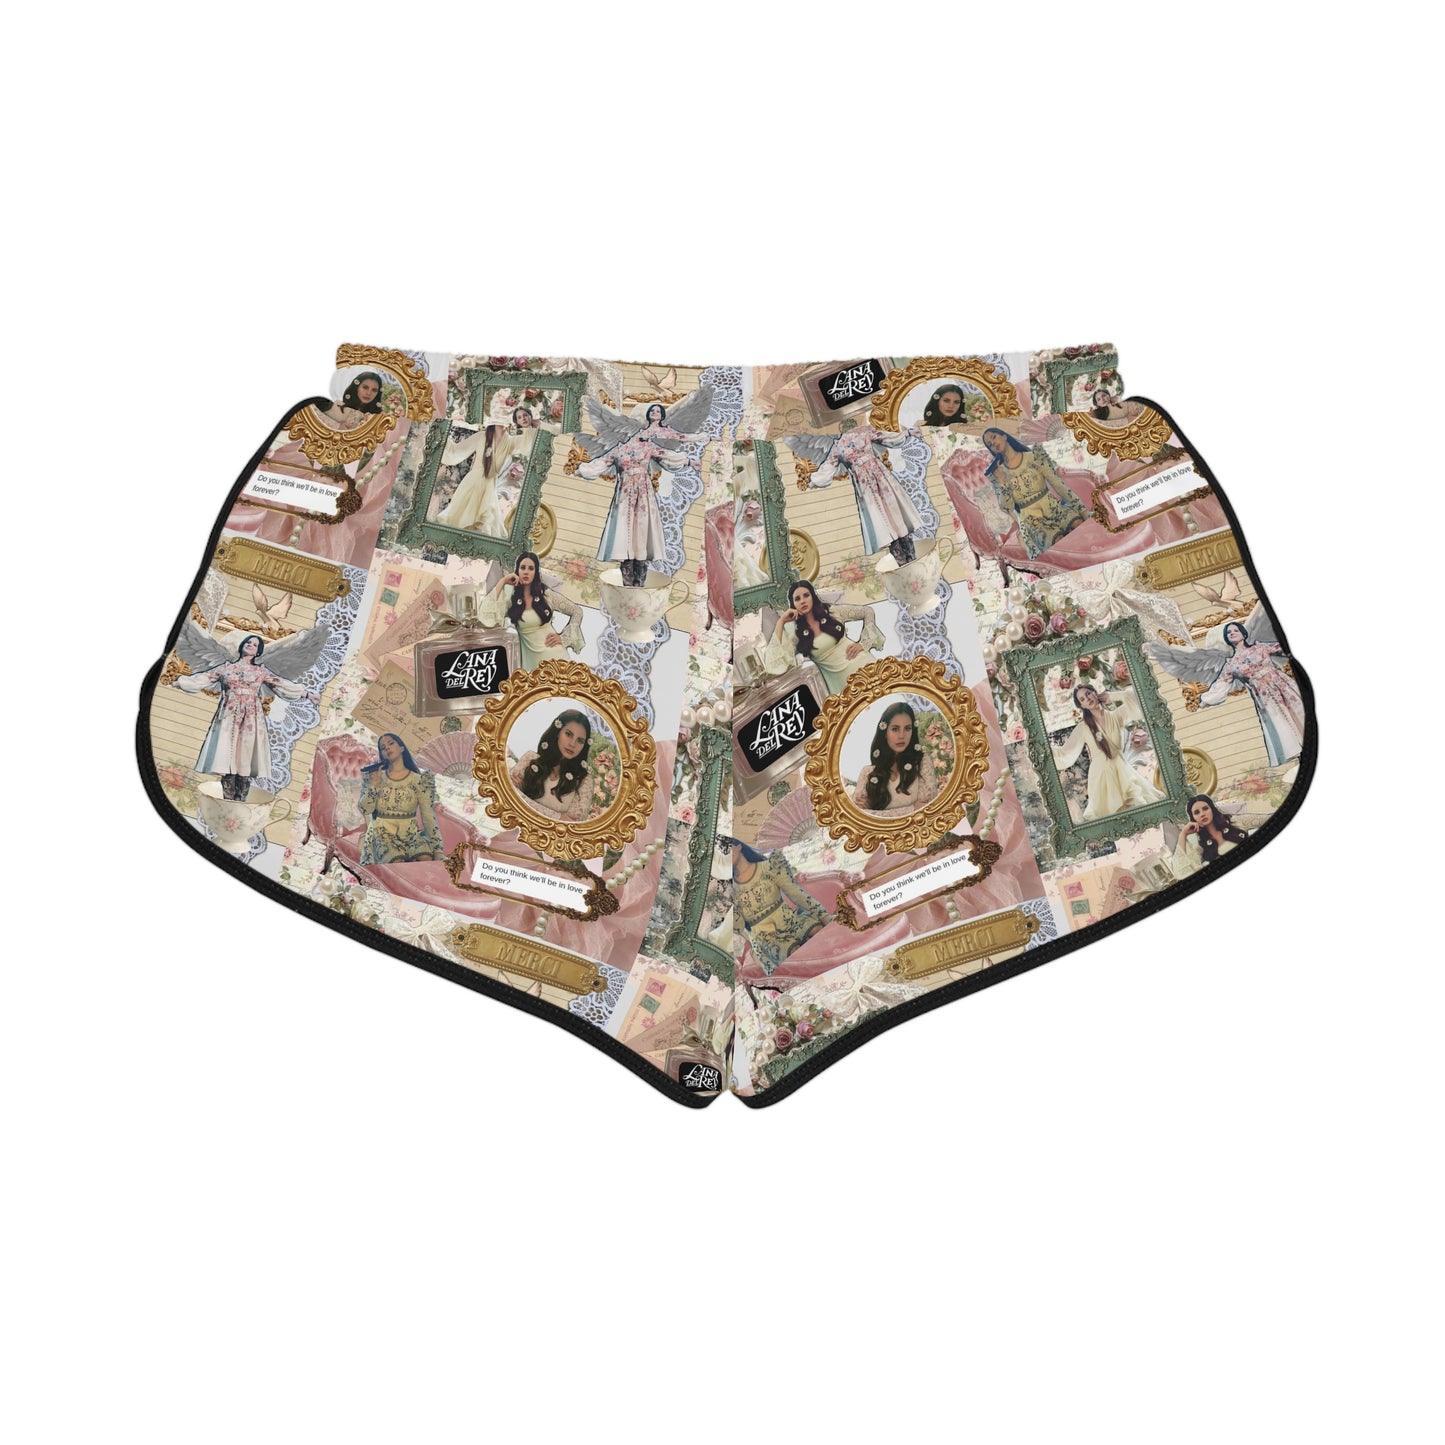 Lana Del Rey Victorian Collage Women's Relaxed Shorts